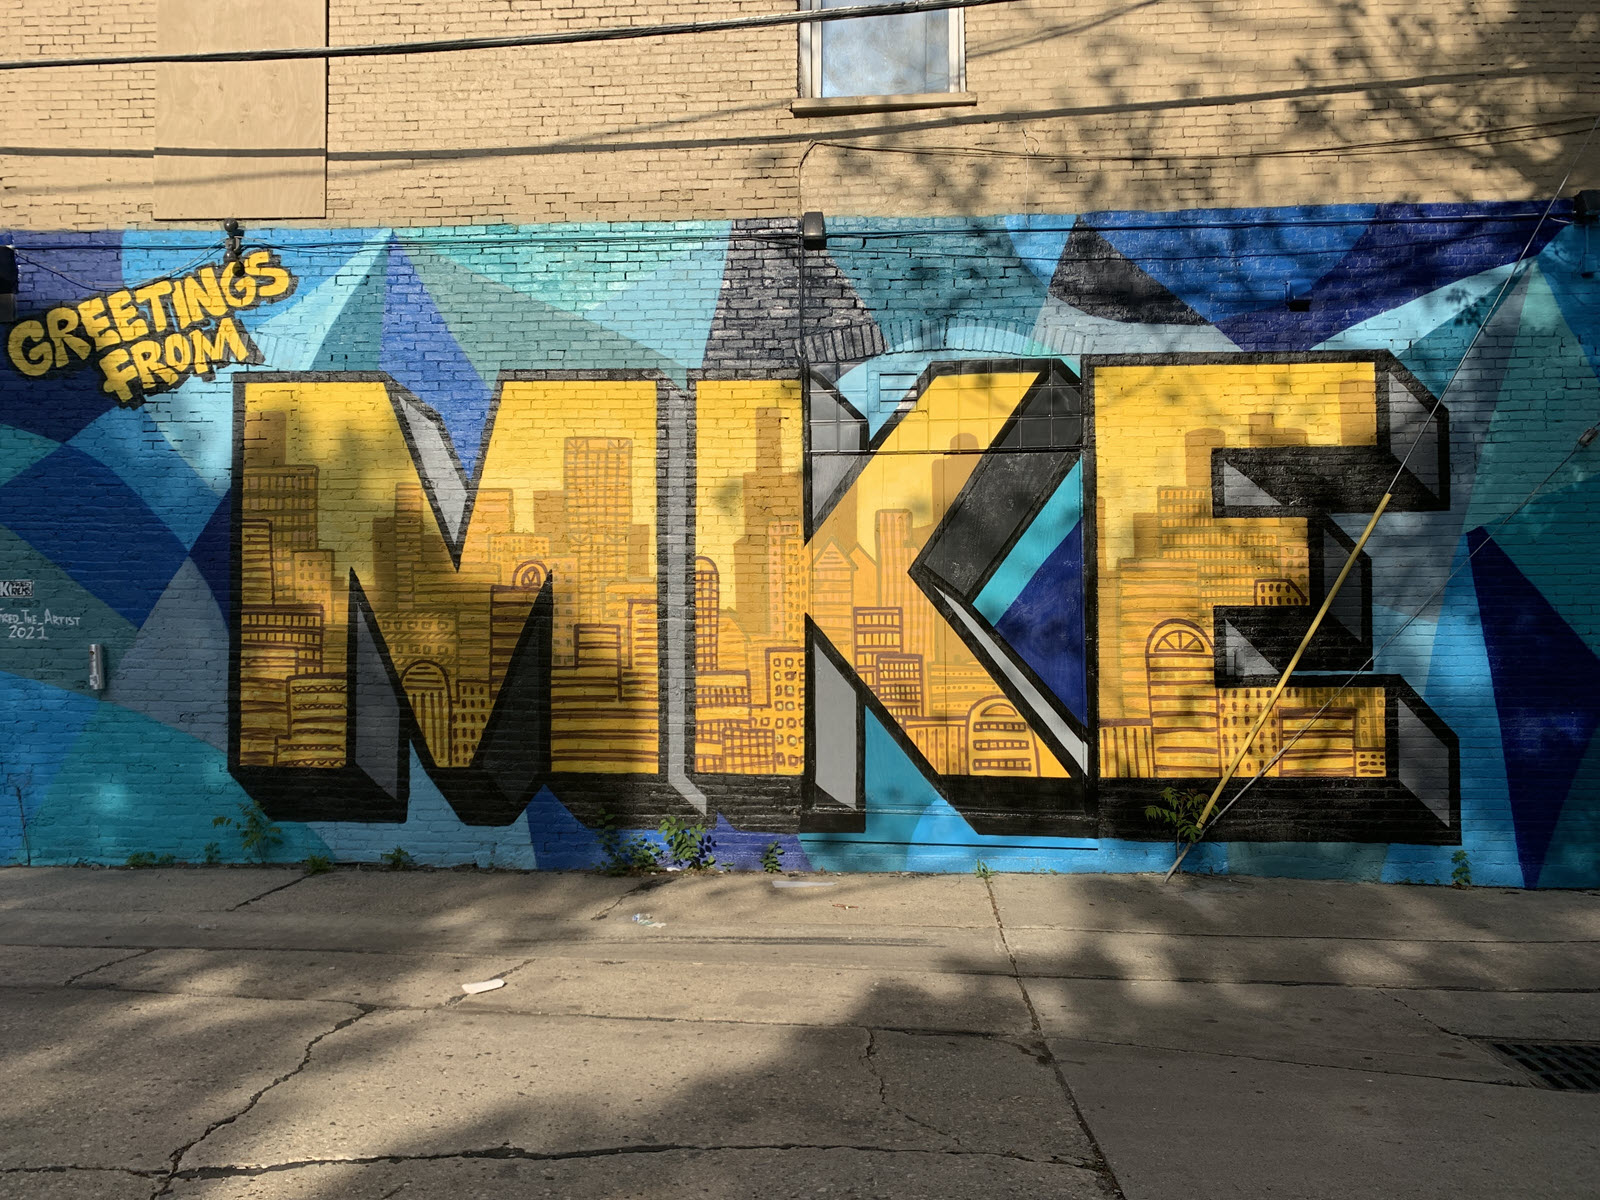 Image of mural that reads "Greetings from MKE"